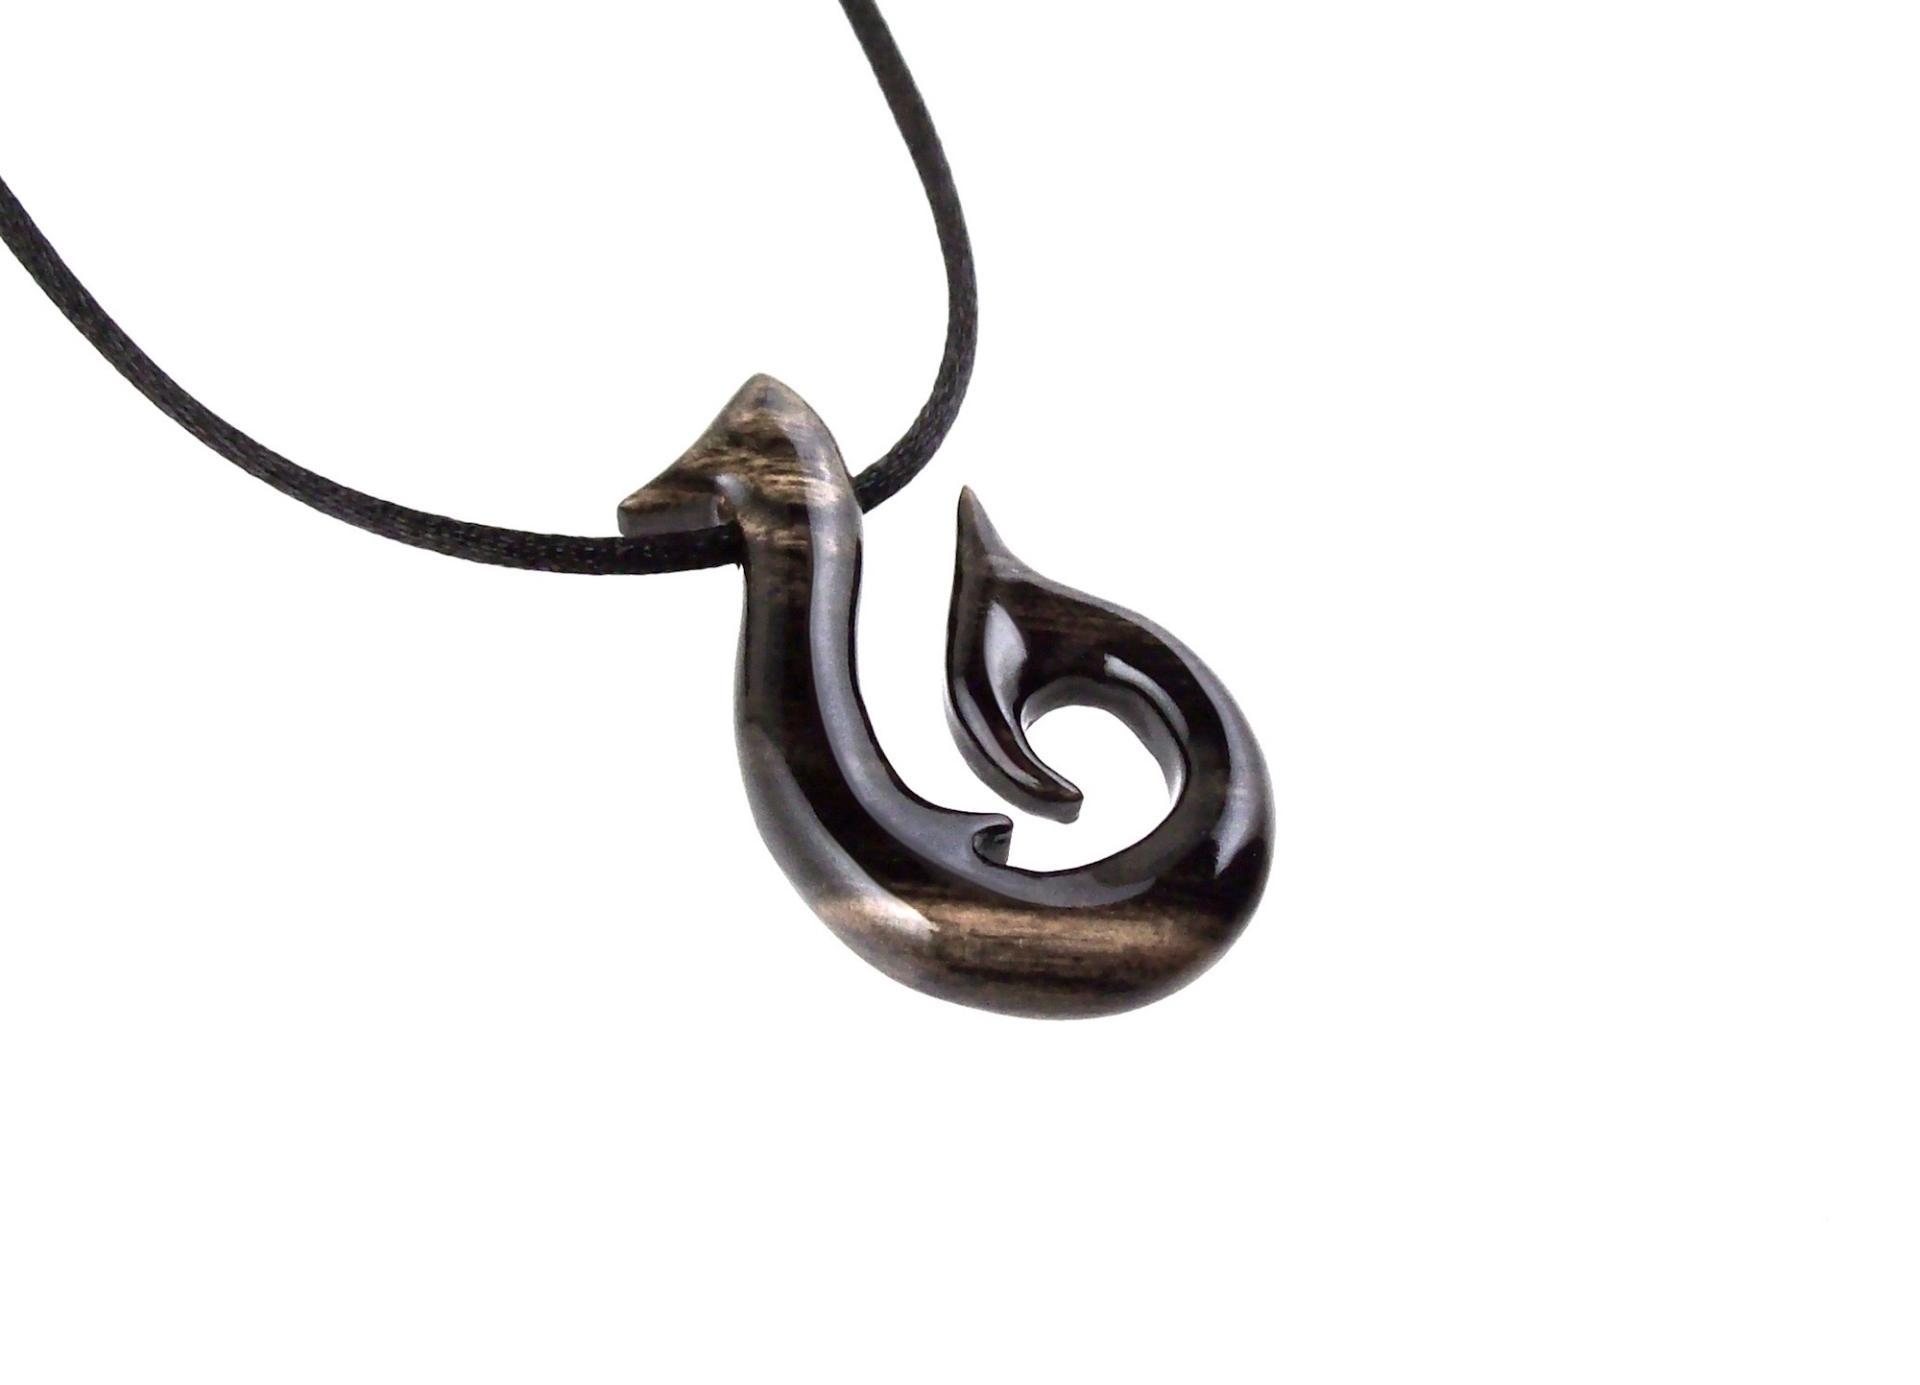 Wooden Fish Hook Pendant, Hand Carved Fish Hook Necklace, Mens Wood Necklace, Fisherman Jewelry, Gift for Him